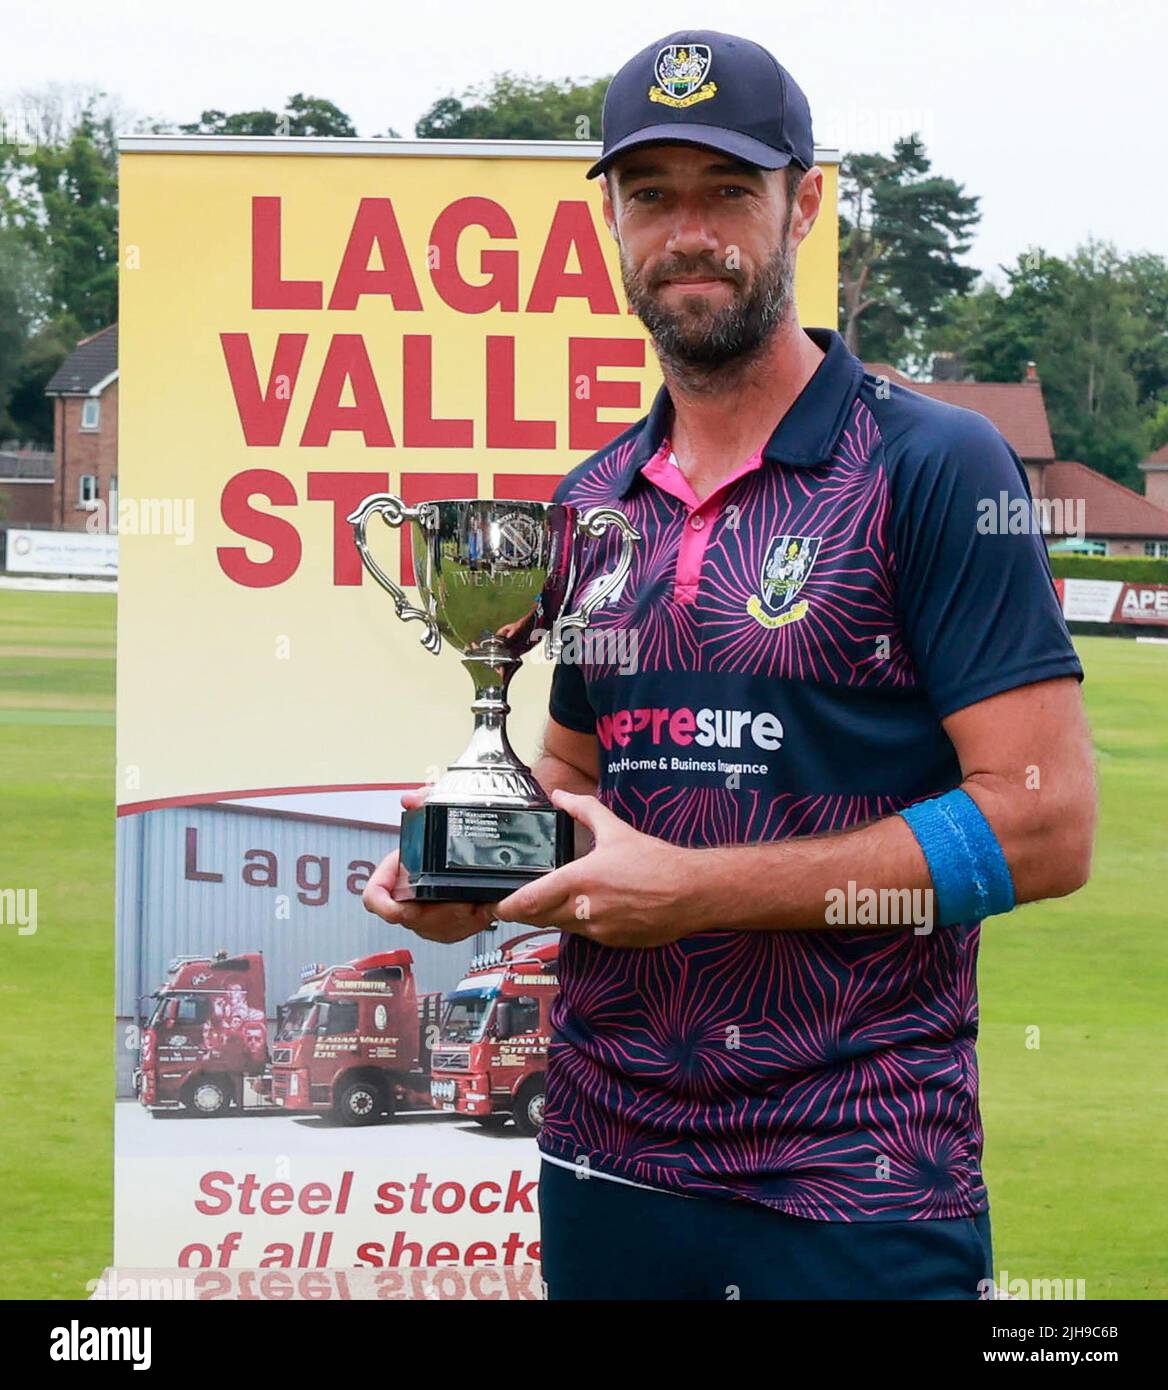 The Lawn, Waringstown, Northern Ireland, UK. 16 Jul 2022. The Lagan Valley Steels Twenty 20 Cup Final 2022. CIYMS v CSNI – CIYMS won by 16 runs (DLS) in a rain-affected match. CIYMD captain Nigel Jones with the Lagan Valley Steel T20 Cup. Credit: David Hunter/Alamy Live News Stock Photo